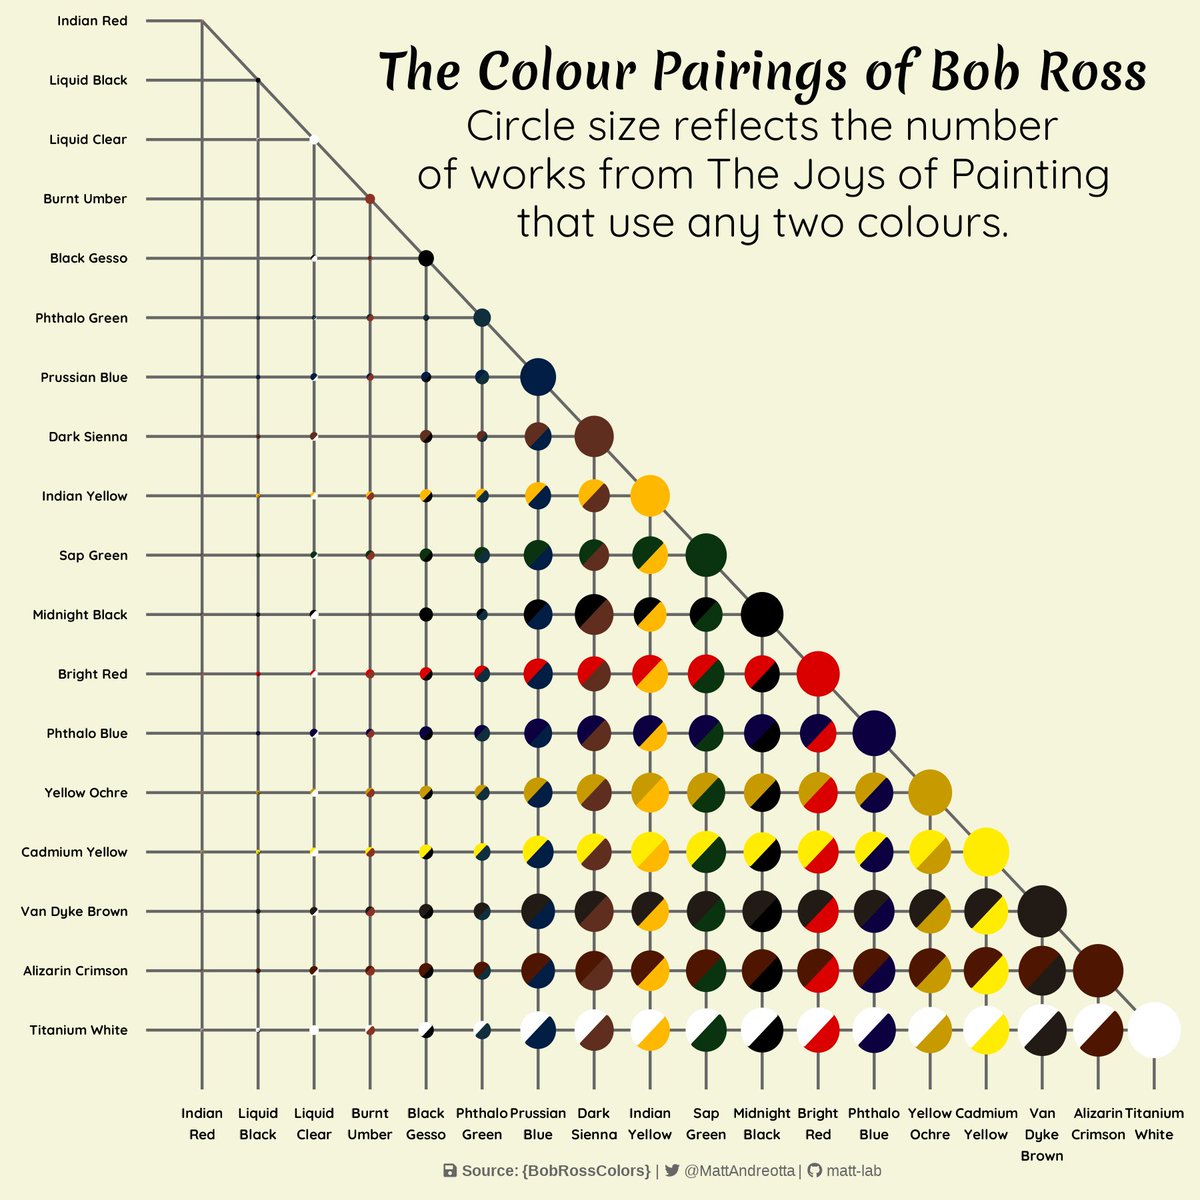 #TidyTuesday's week 8 | The paintings of Bob Ross

My second TidyTuesday. I visualised the prominent colours used in Bob Ross' work🎨 In the process, I discovered geom_arc_bar()🌅

Code: github.com/matt-lab/tidyt…

#R4DS #RStats #DataViz #ggplot2 #tidyverse